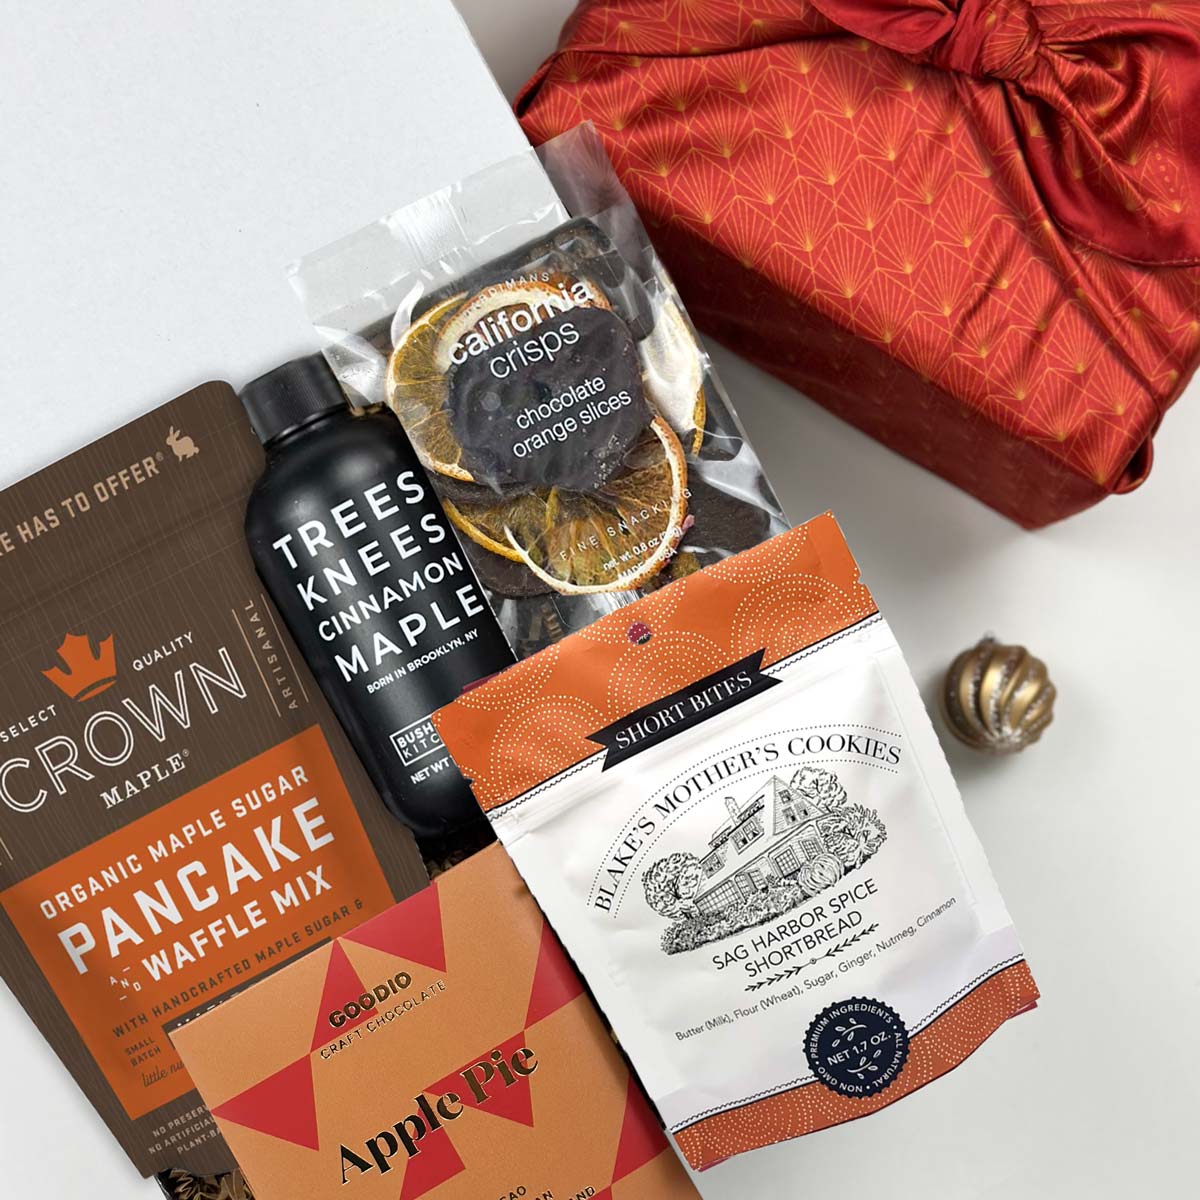 kadoo gourmet pancake holiday gift box wrapped in furoshiki fabric, with pancake &amp; waffle mix, cinnamon maple syrup, apple pie chocolate, cookie and more